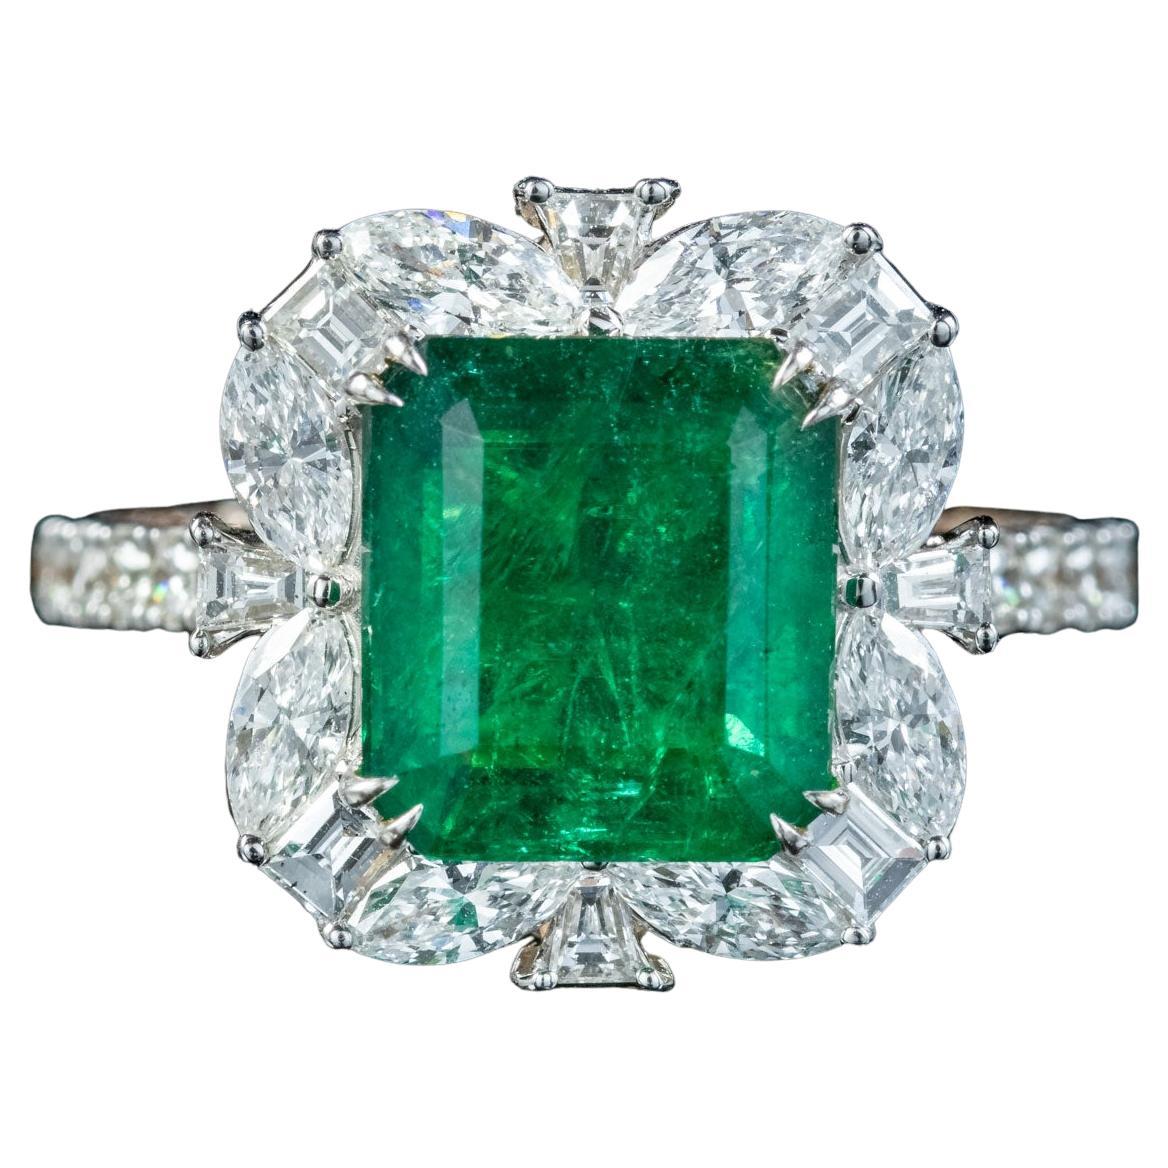 Vintage Emerald Diamond Cluster Ring 3.11ct Natural Brazilian Emerald with Cert